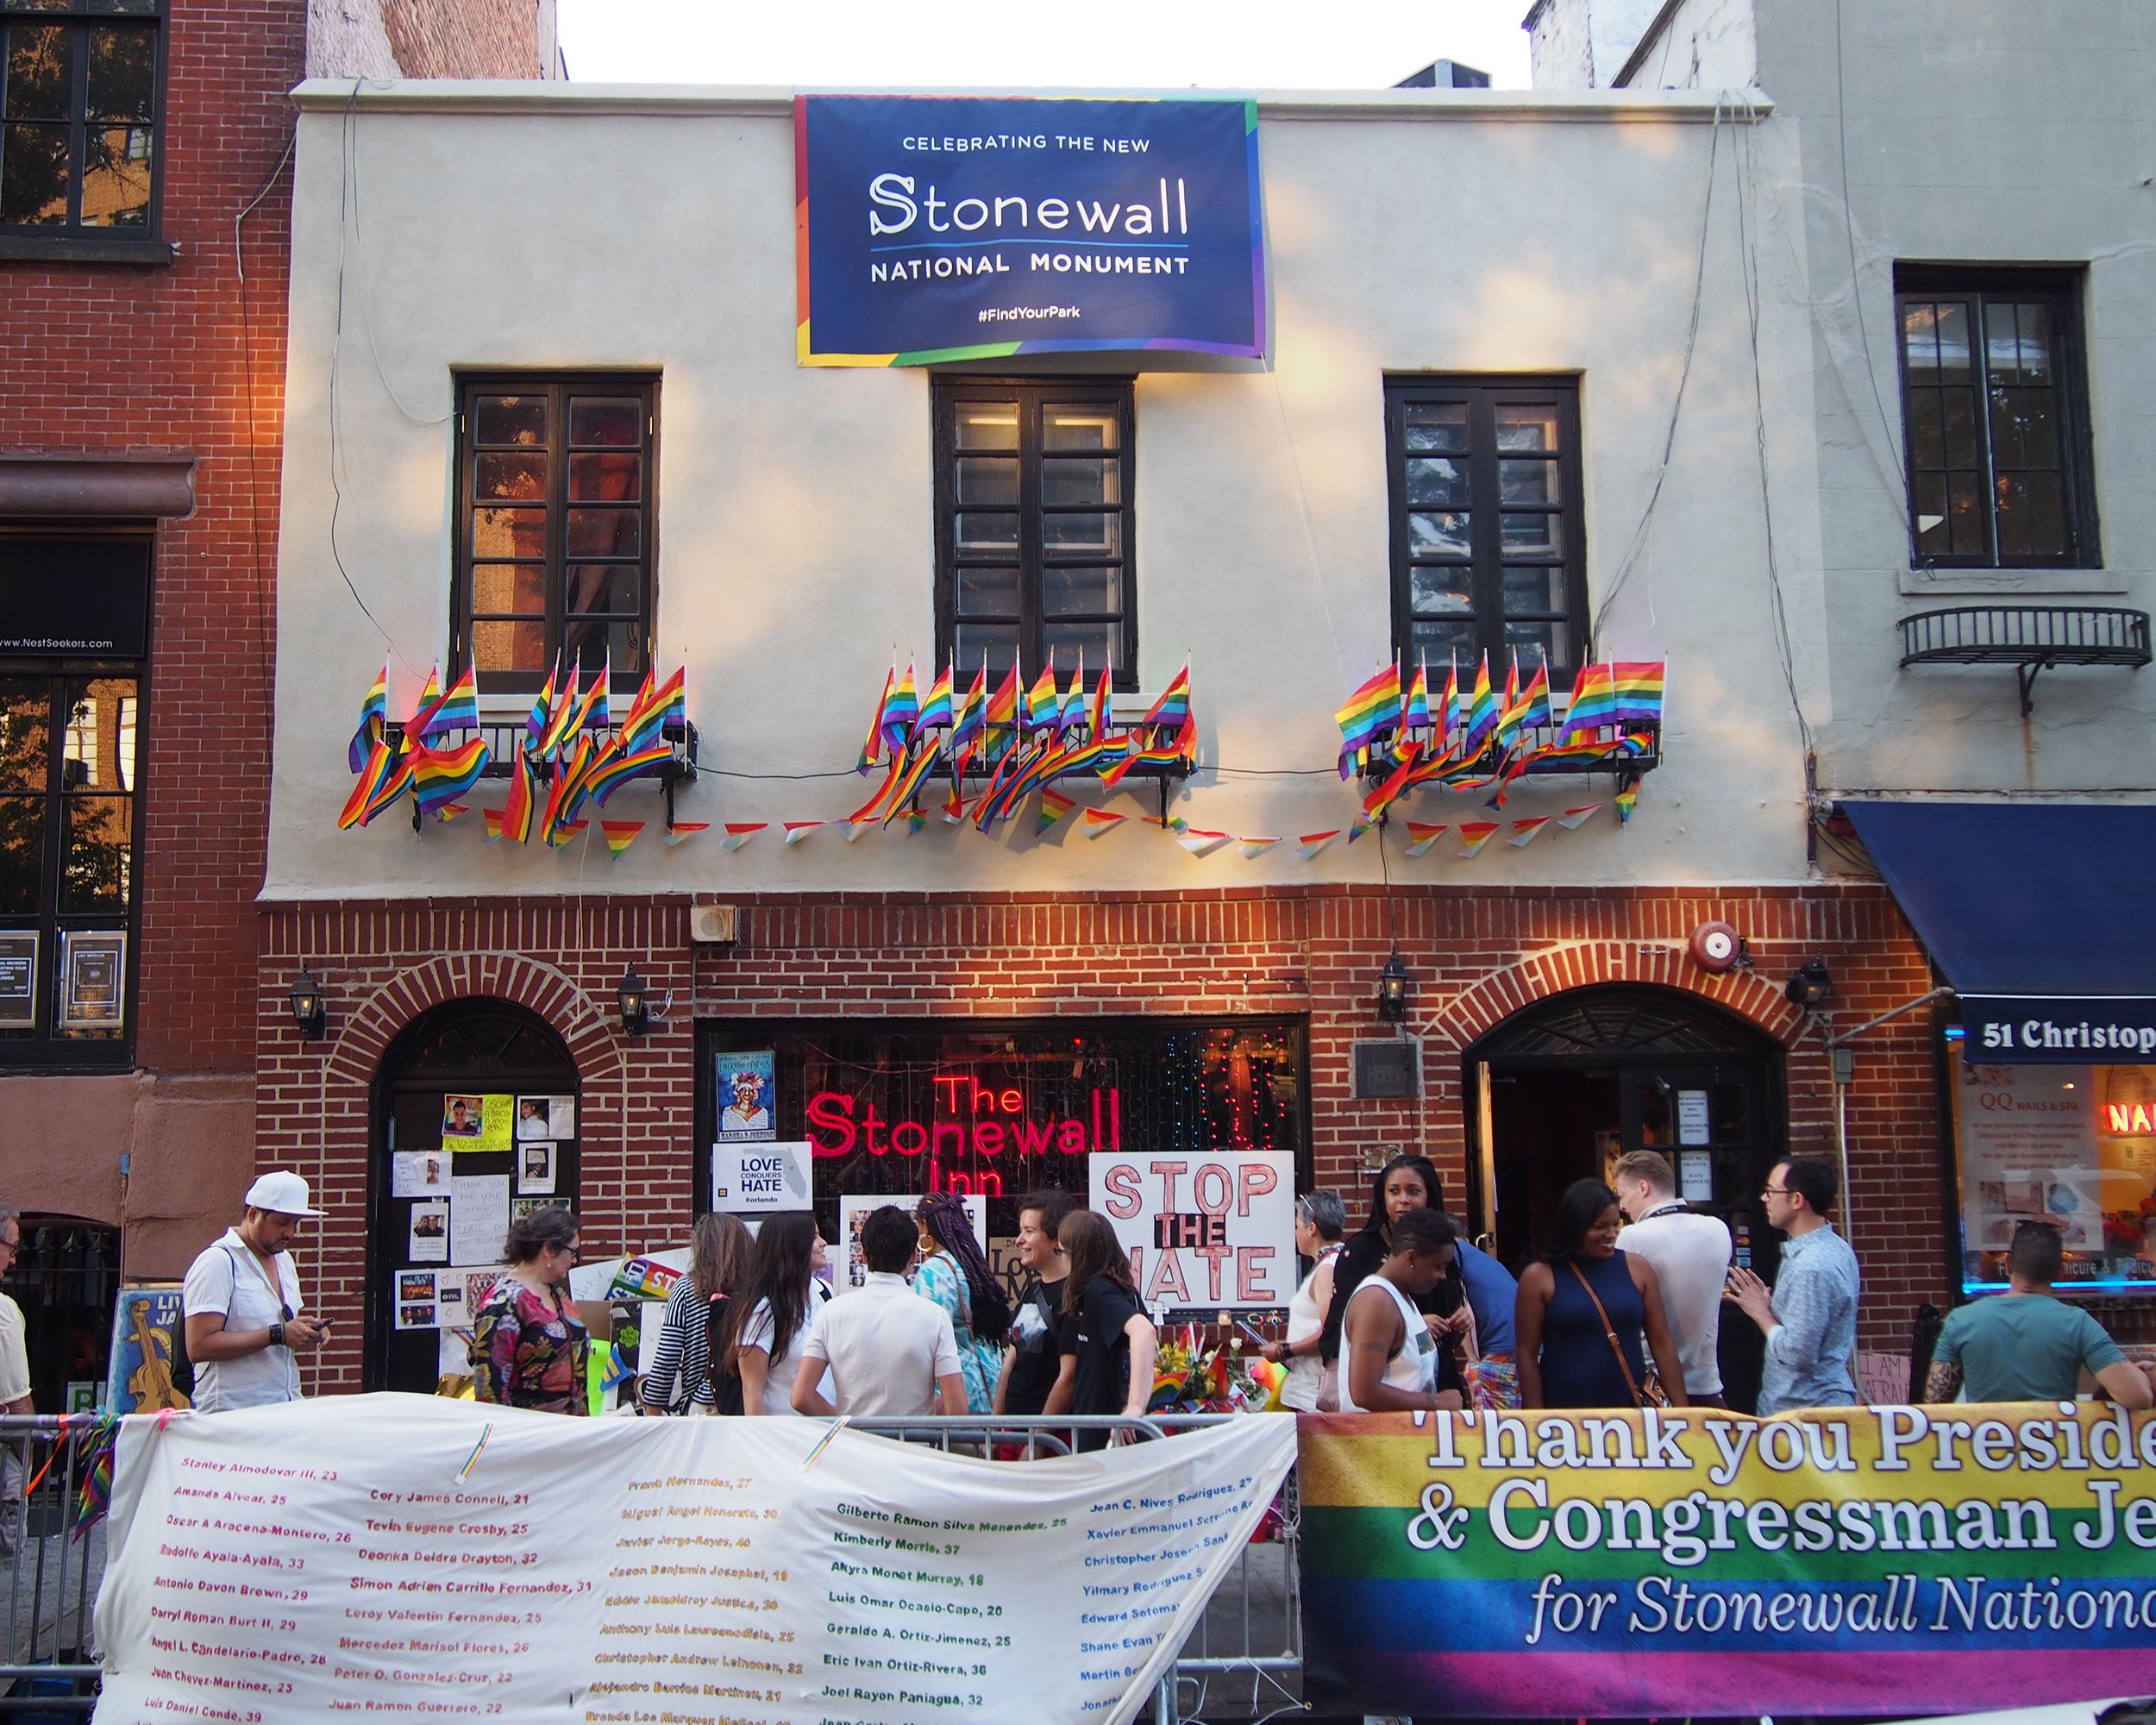 <p>New York Harbor and downtown Manhattan are home to several sites administered by the National Park Service, including the Statue of Liberty. The <a href="https://www.nps.gov/ston/index.htm">Stonewall Inn</a> was declared a national monument in 2016. The Greenwich Village bar is viewed by many as the place where the modern struggle for gay rights began. A police raid in June 1969 led to six days of demonstrations by several thousand protesters. </p><p><b>Related:</b> <a href="https://blog.cheapism.com/1960s-counterculture/">29 Destinations That Defined the 1960s</a></p>